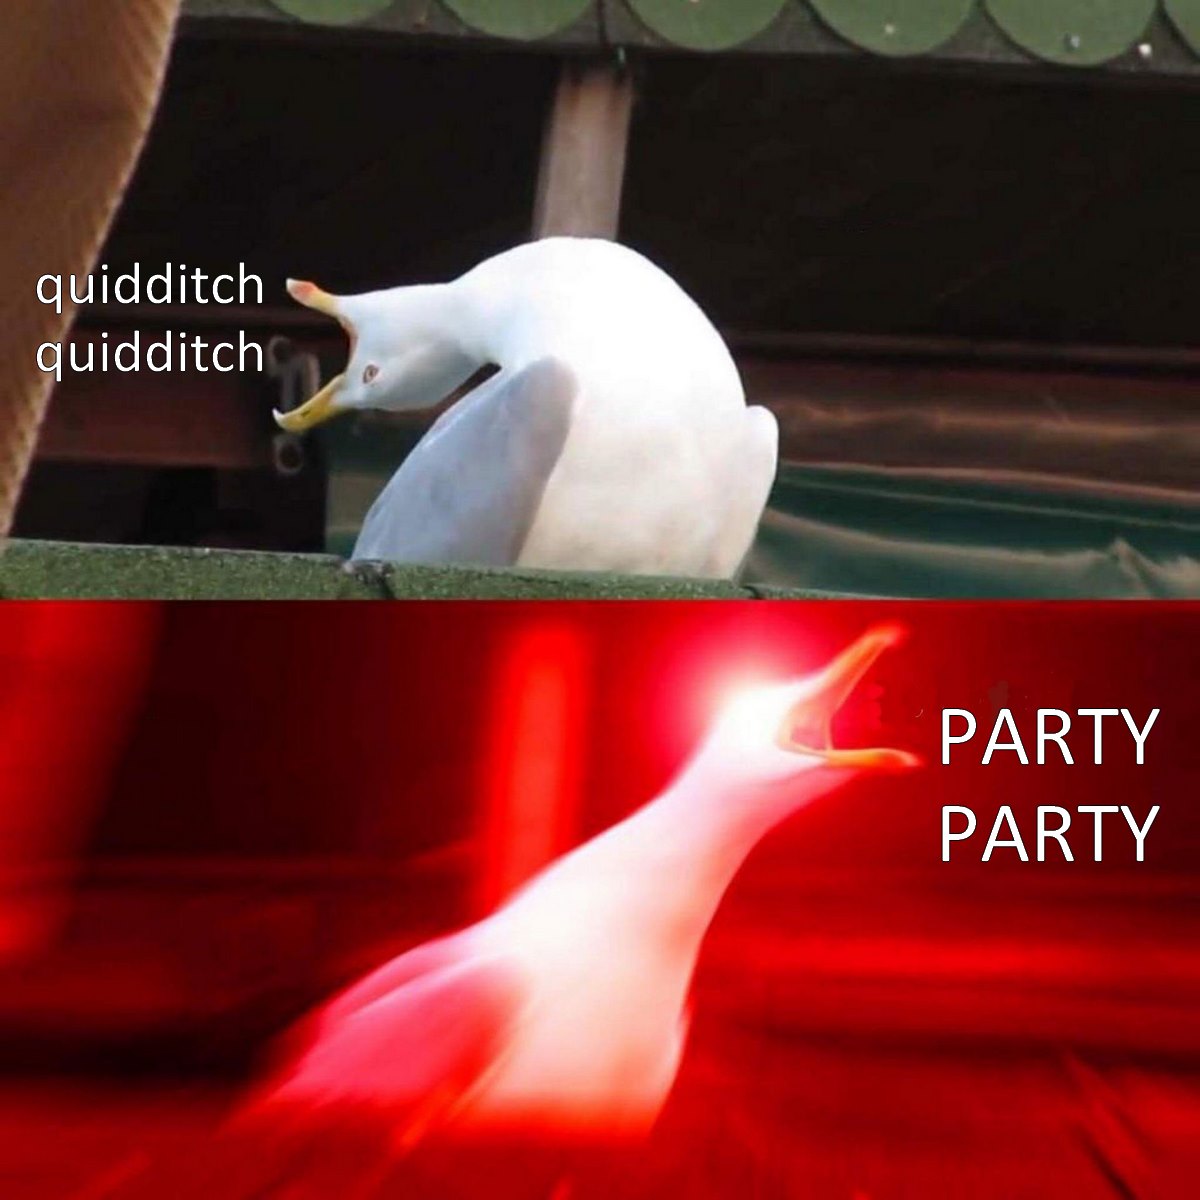 “You say ‘quidditch,’ I say ‘party.’ Quidditch, quidditch! Party, party!”